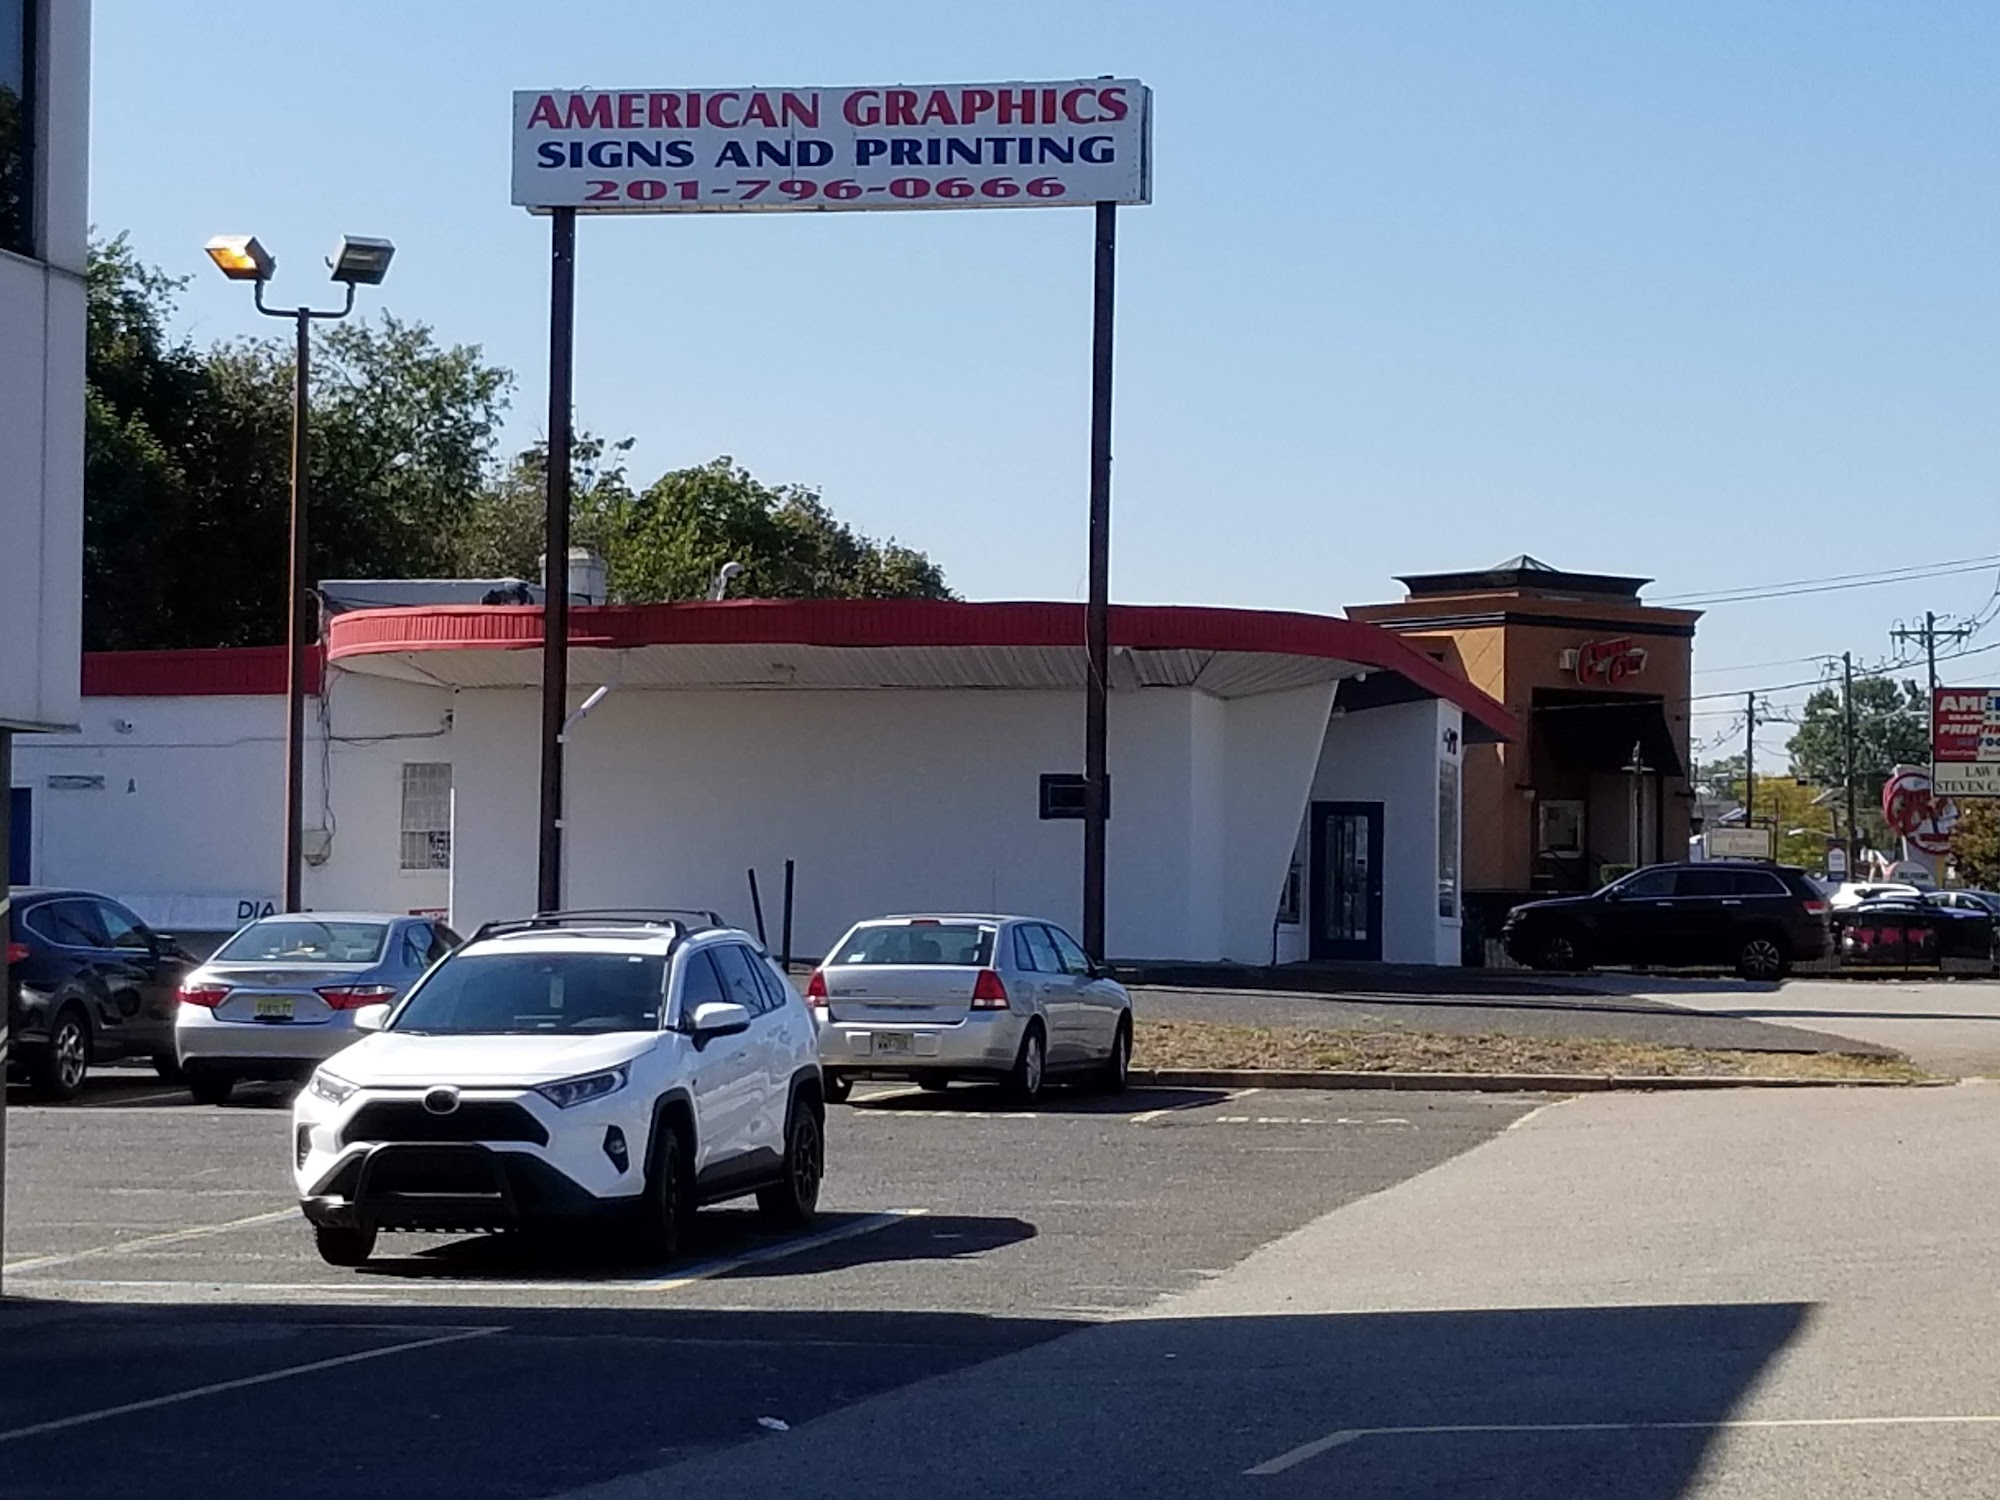 American Graphic Systems